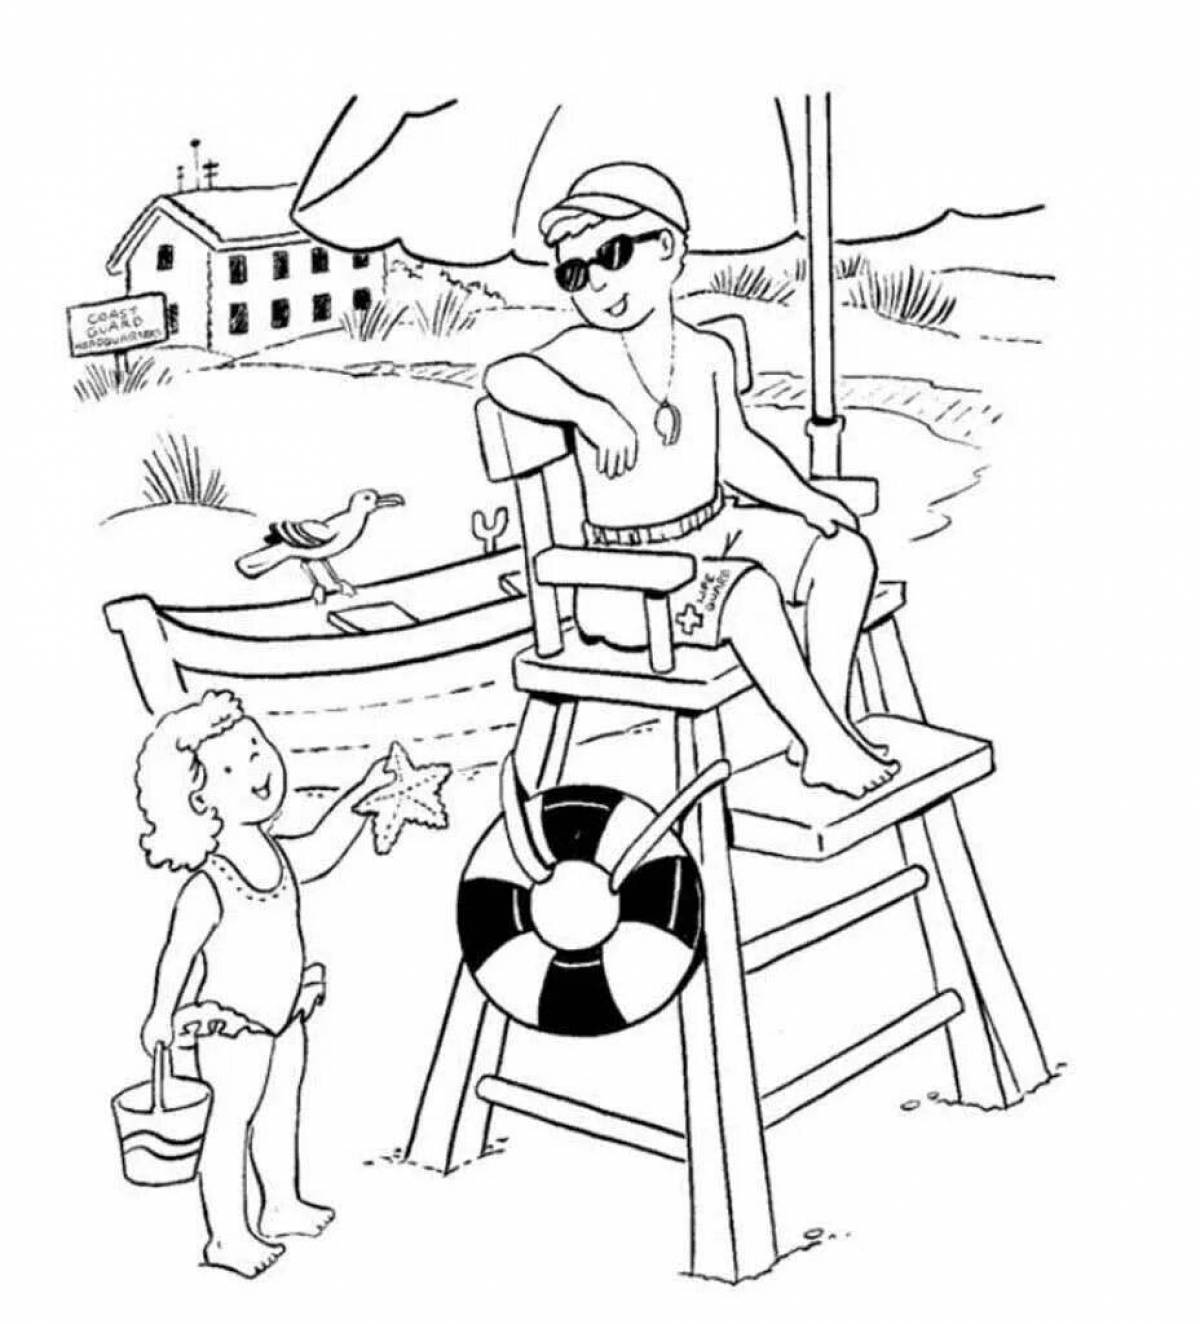 Tempting water safety coloring page